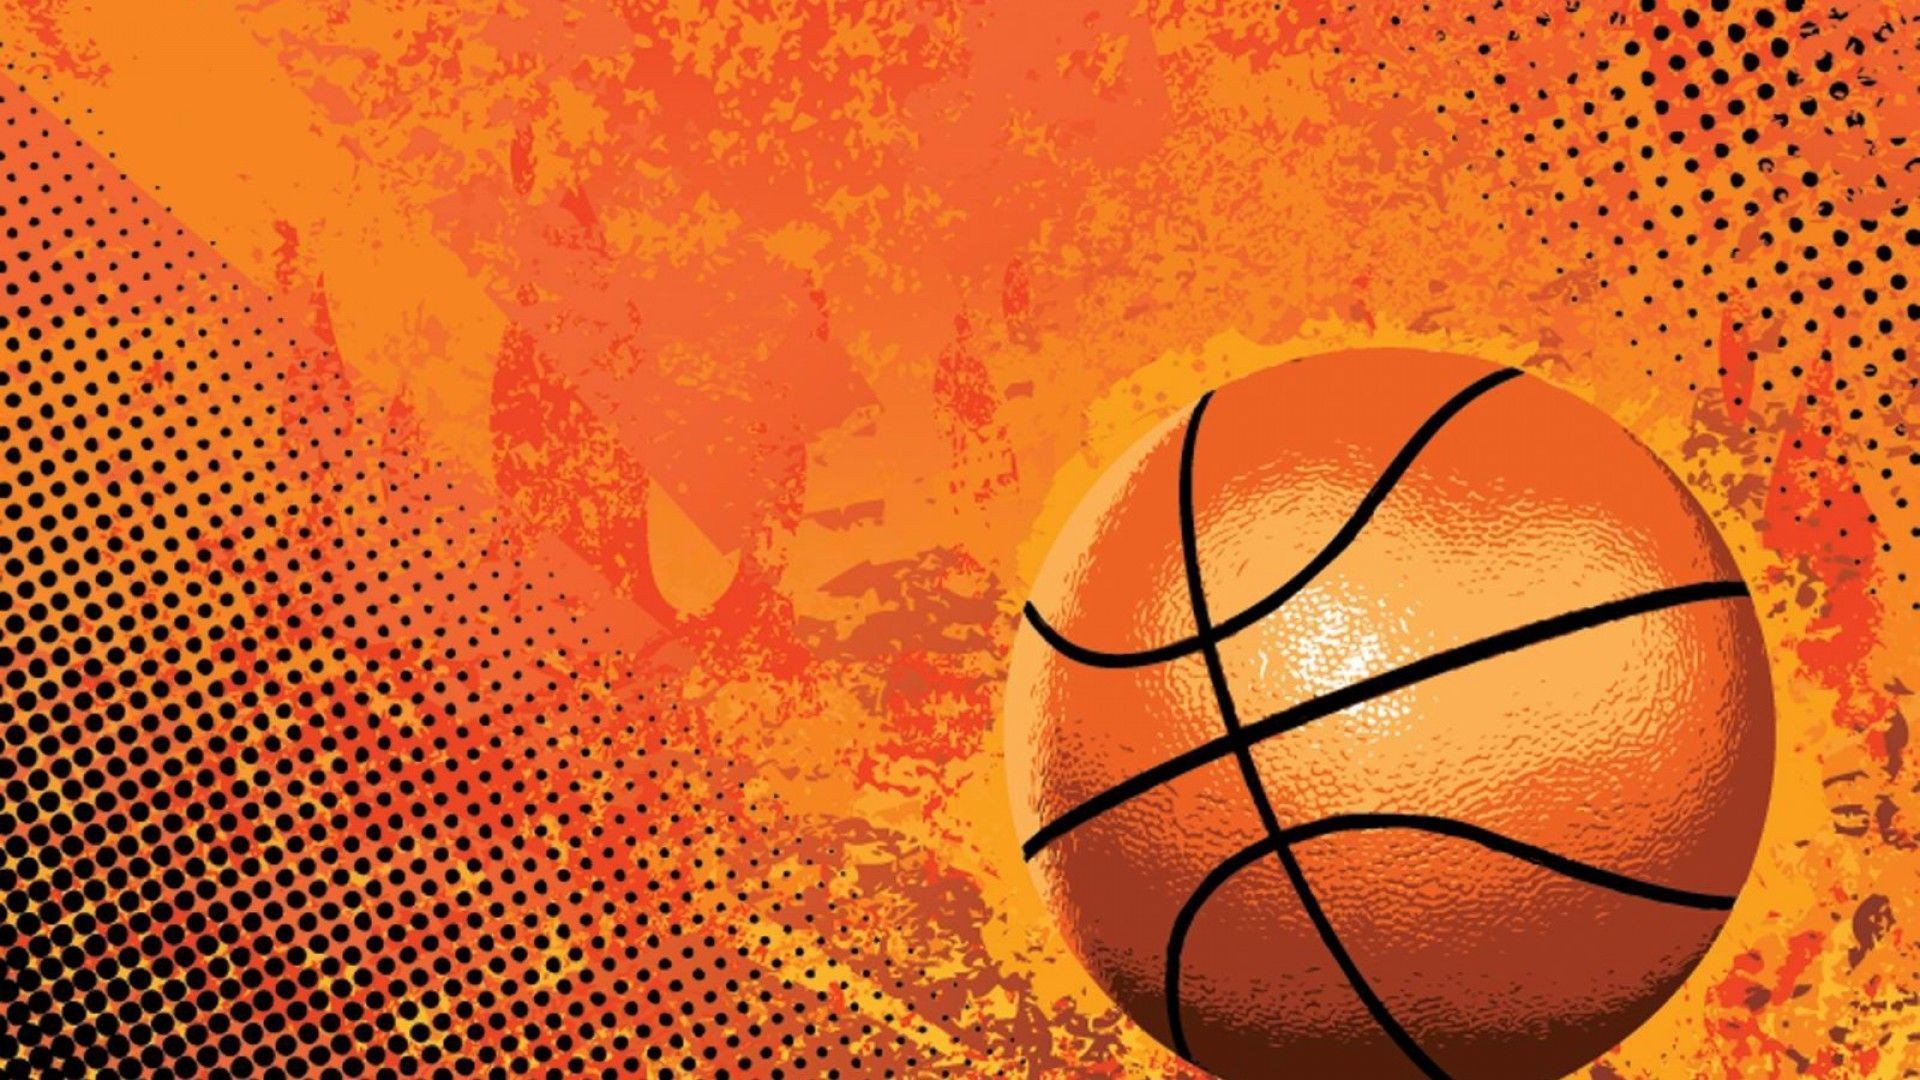 Wallpaper Desktop Basketball Games HD with image dimensions 1920x1080 pixel. You can make this wallpaper for your Desktop Computer Backgrounds, Windows or Mac Screensavers, iPhone Lock screen, Tablet or Android and another Mobile Phone device